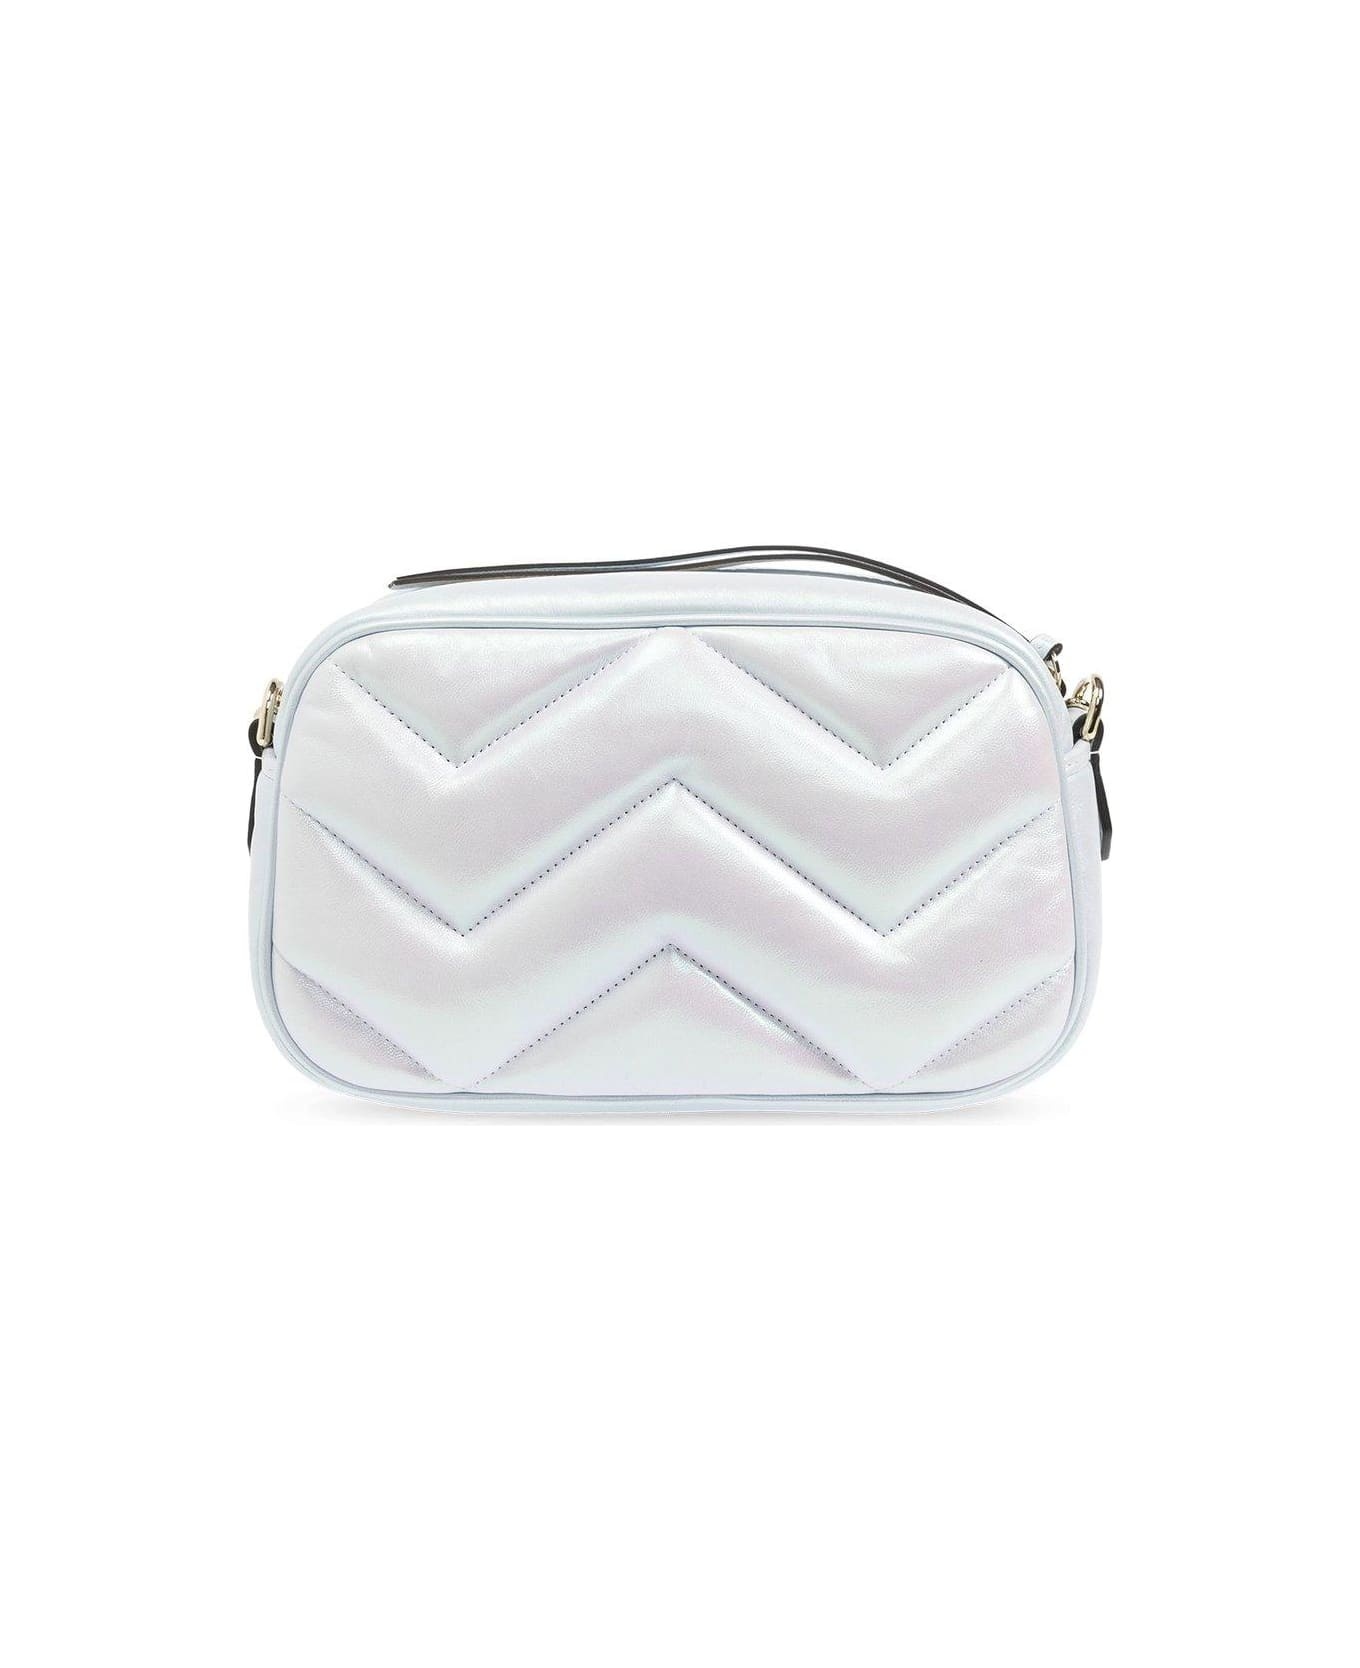 Gg Marmont Small Shoulder Bag - 2